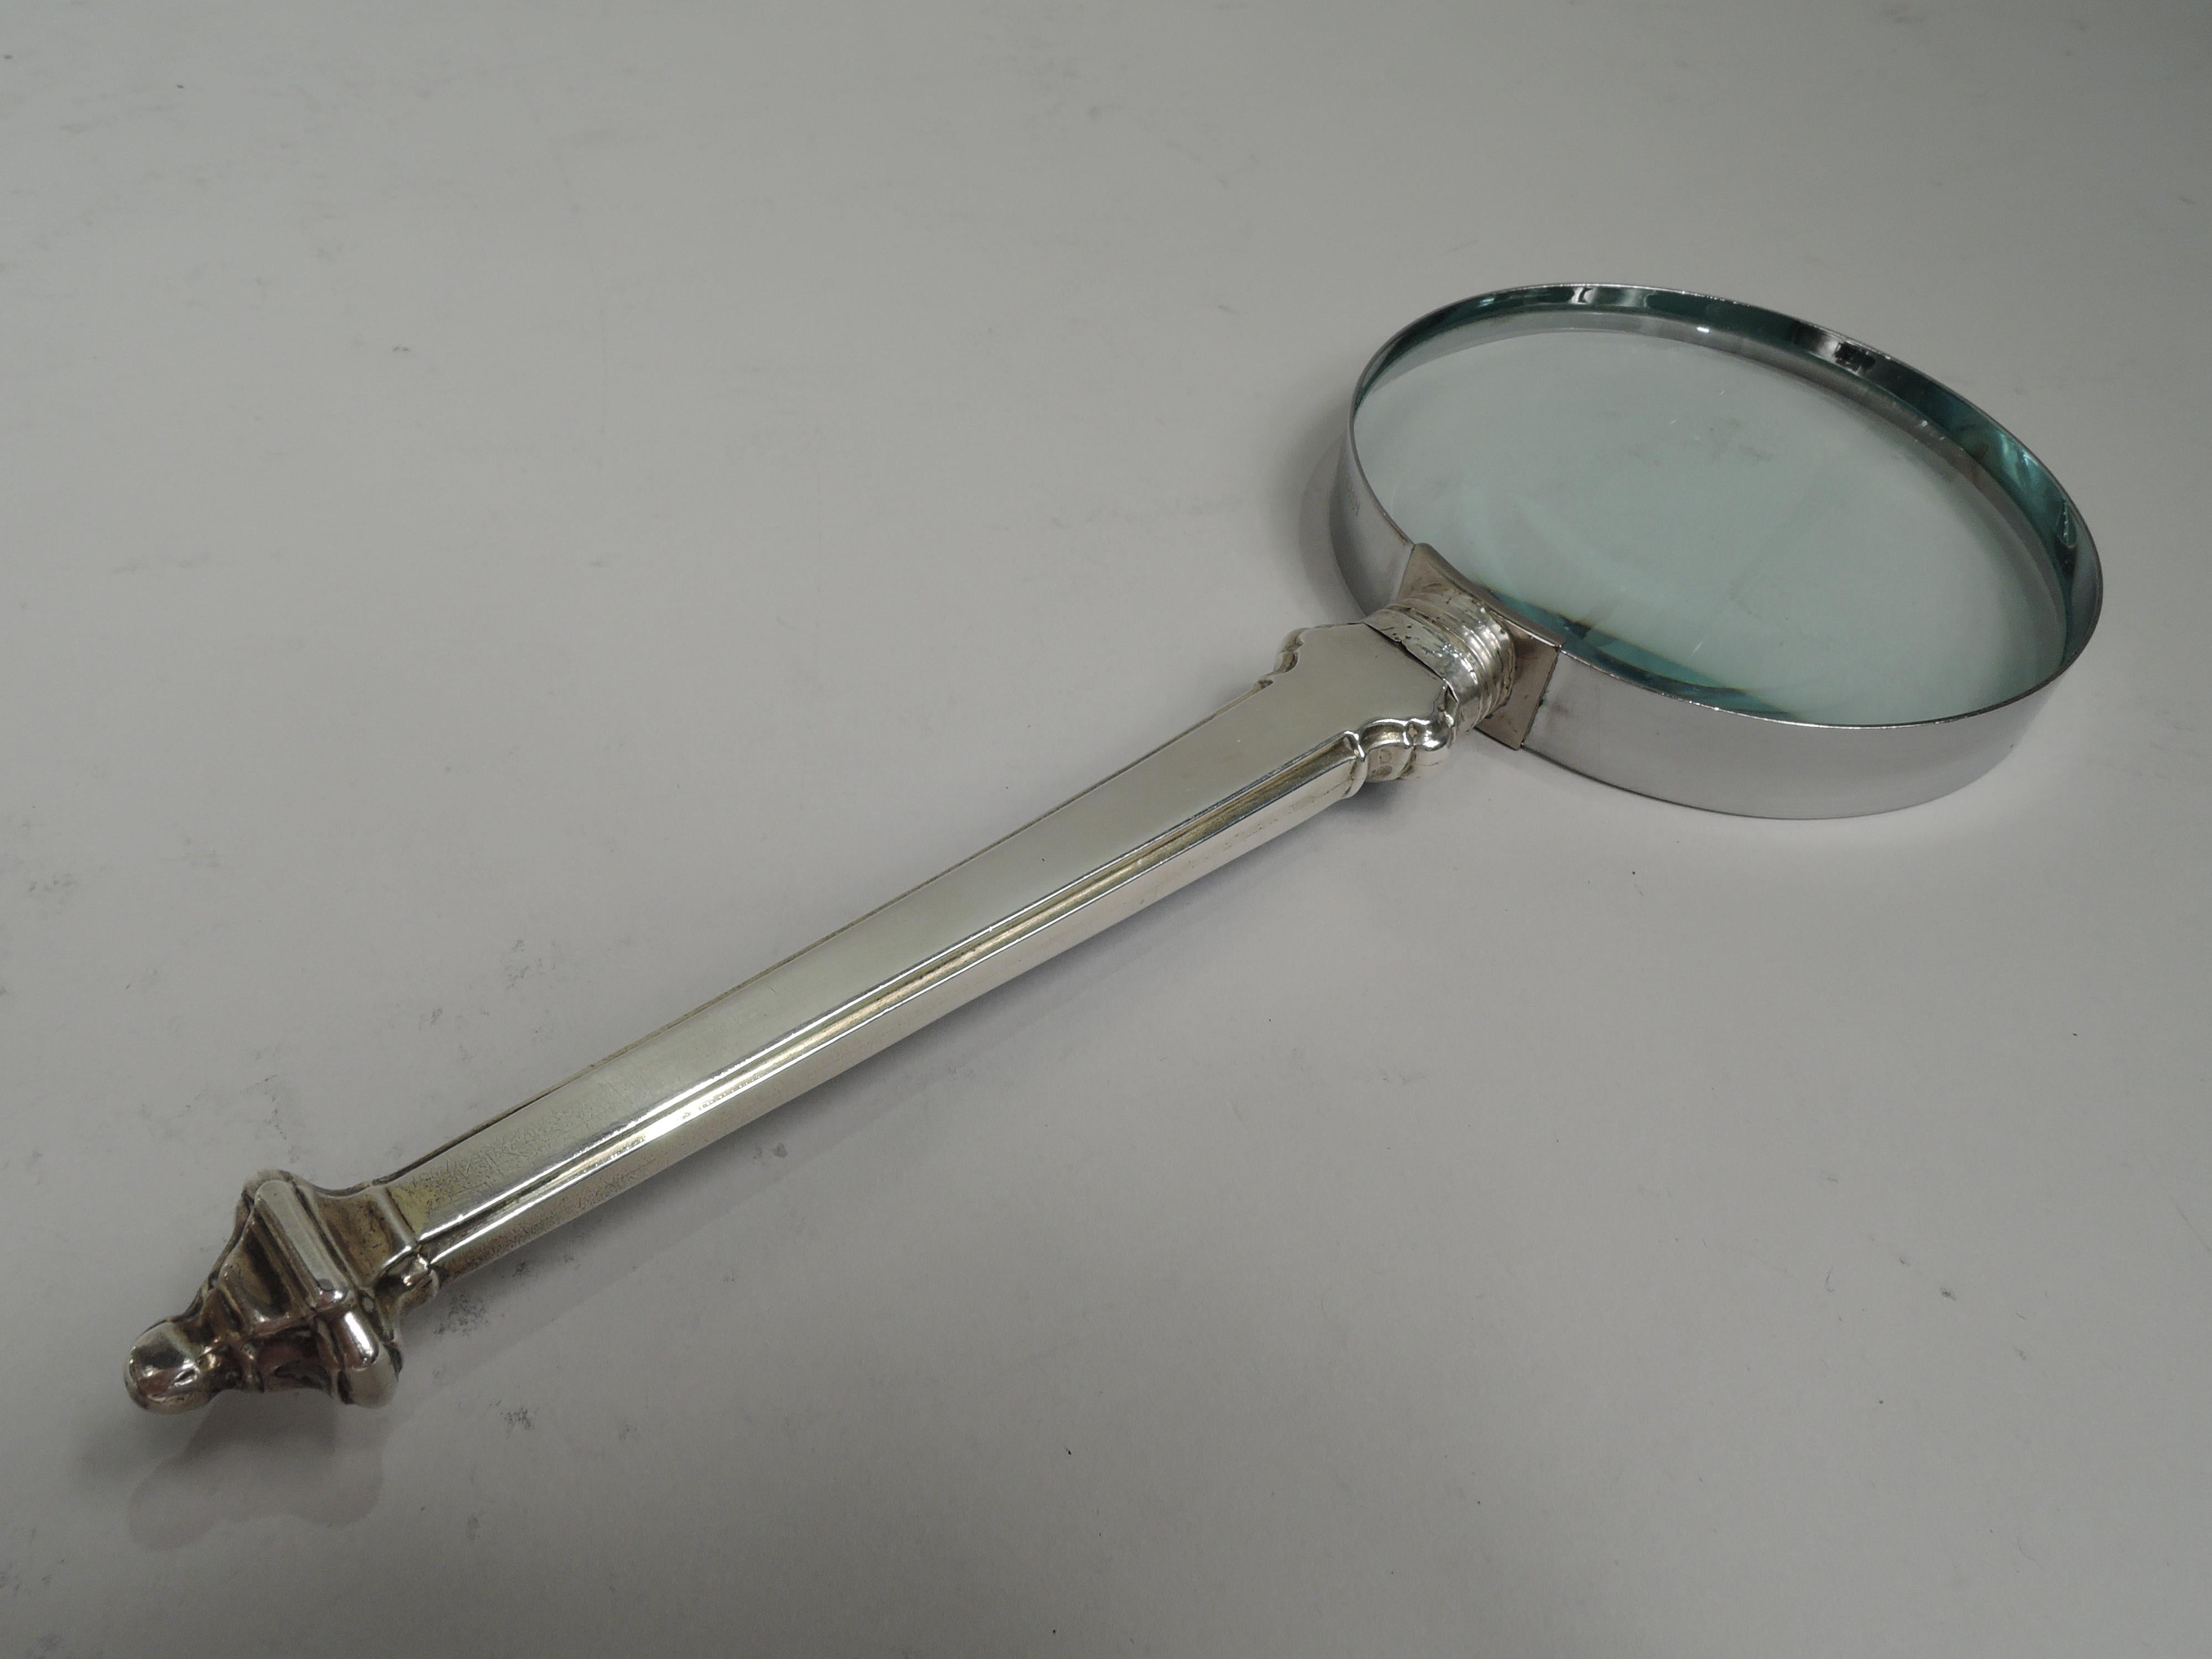 English Edwardian sterling silver and enamel magnifying glass, 1910. Tapering handle with vasiform finial and blue guilloche enamel on front; back plain. Round lens in metal frame. Handle has English marks including Sheffield assay stamp and worn